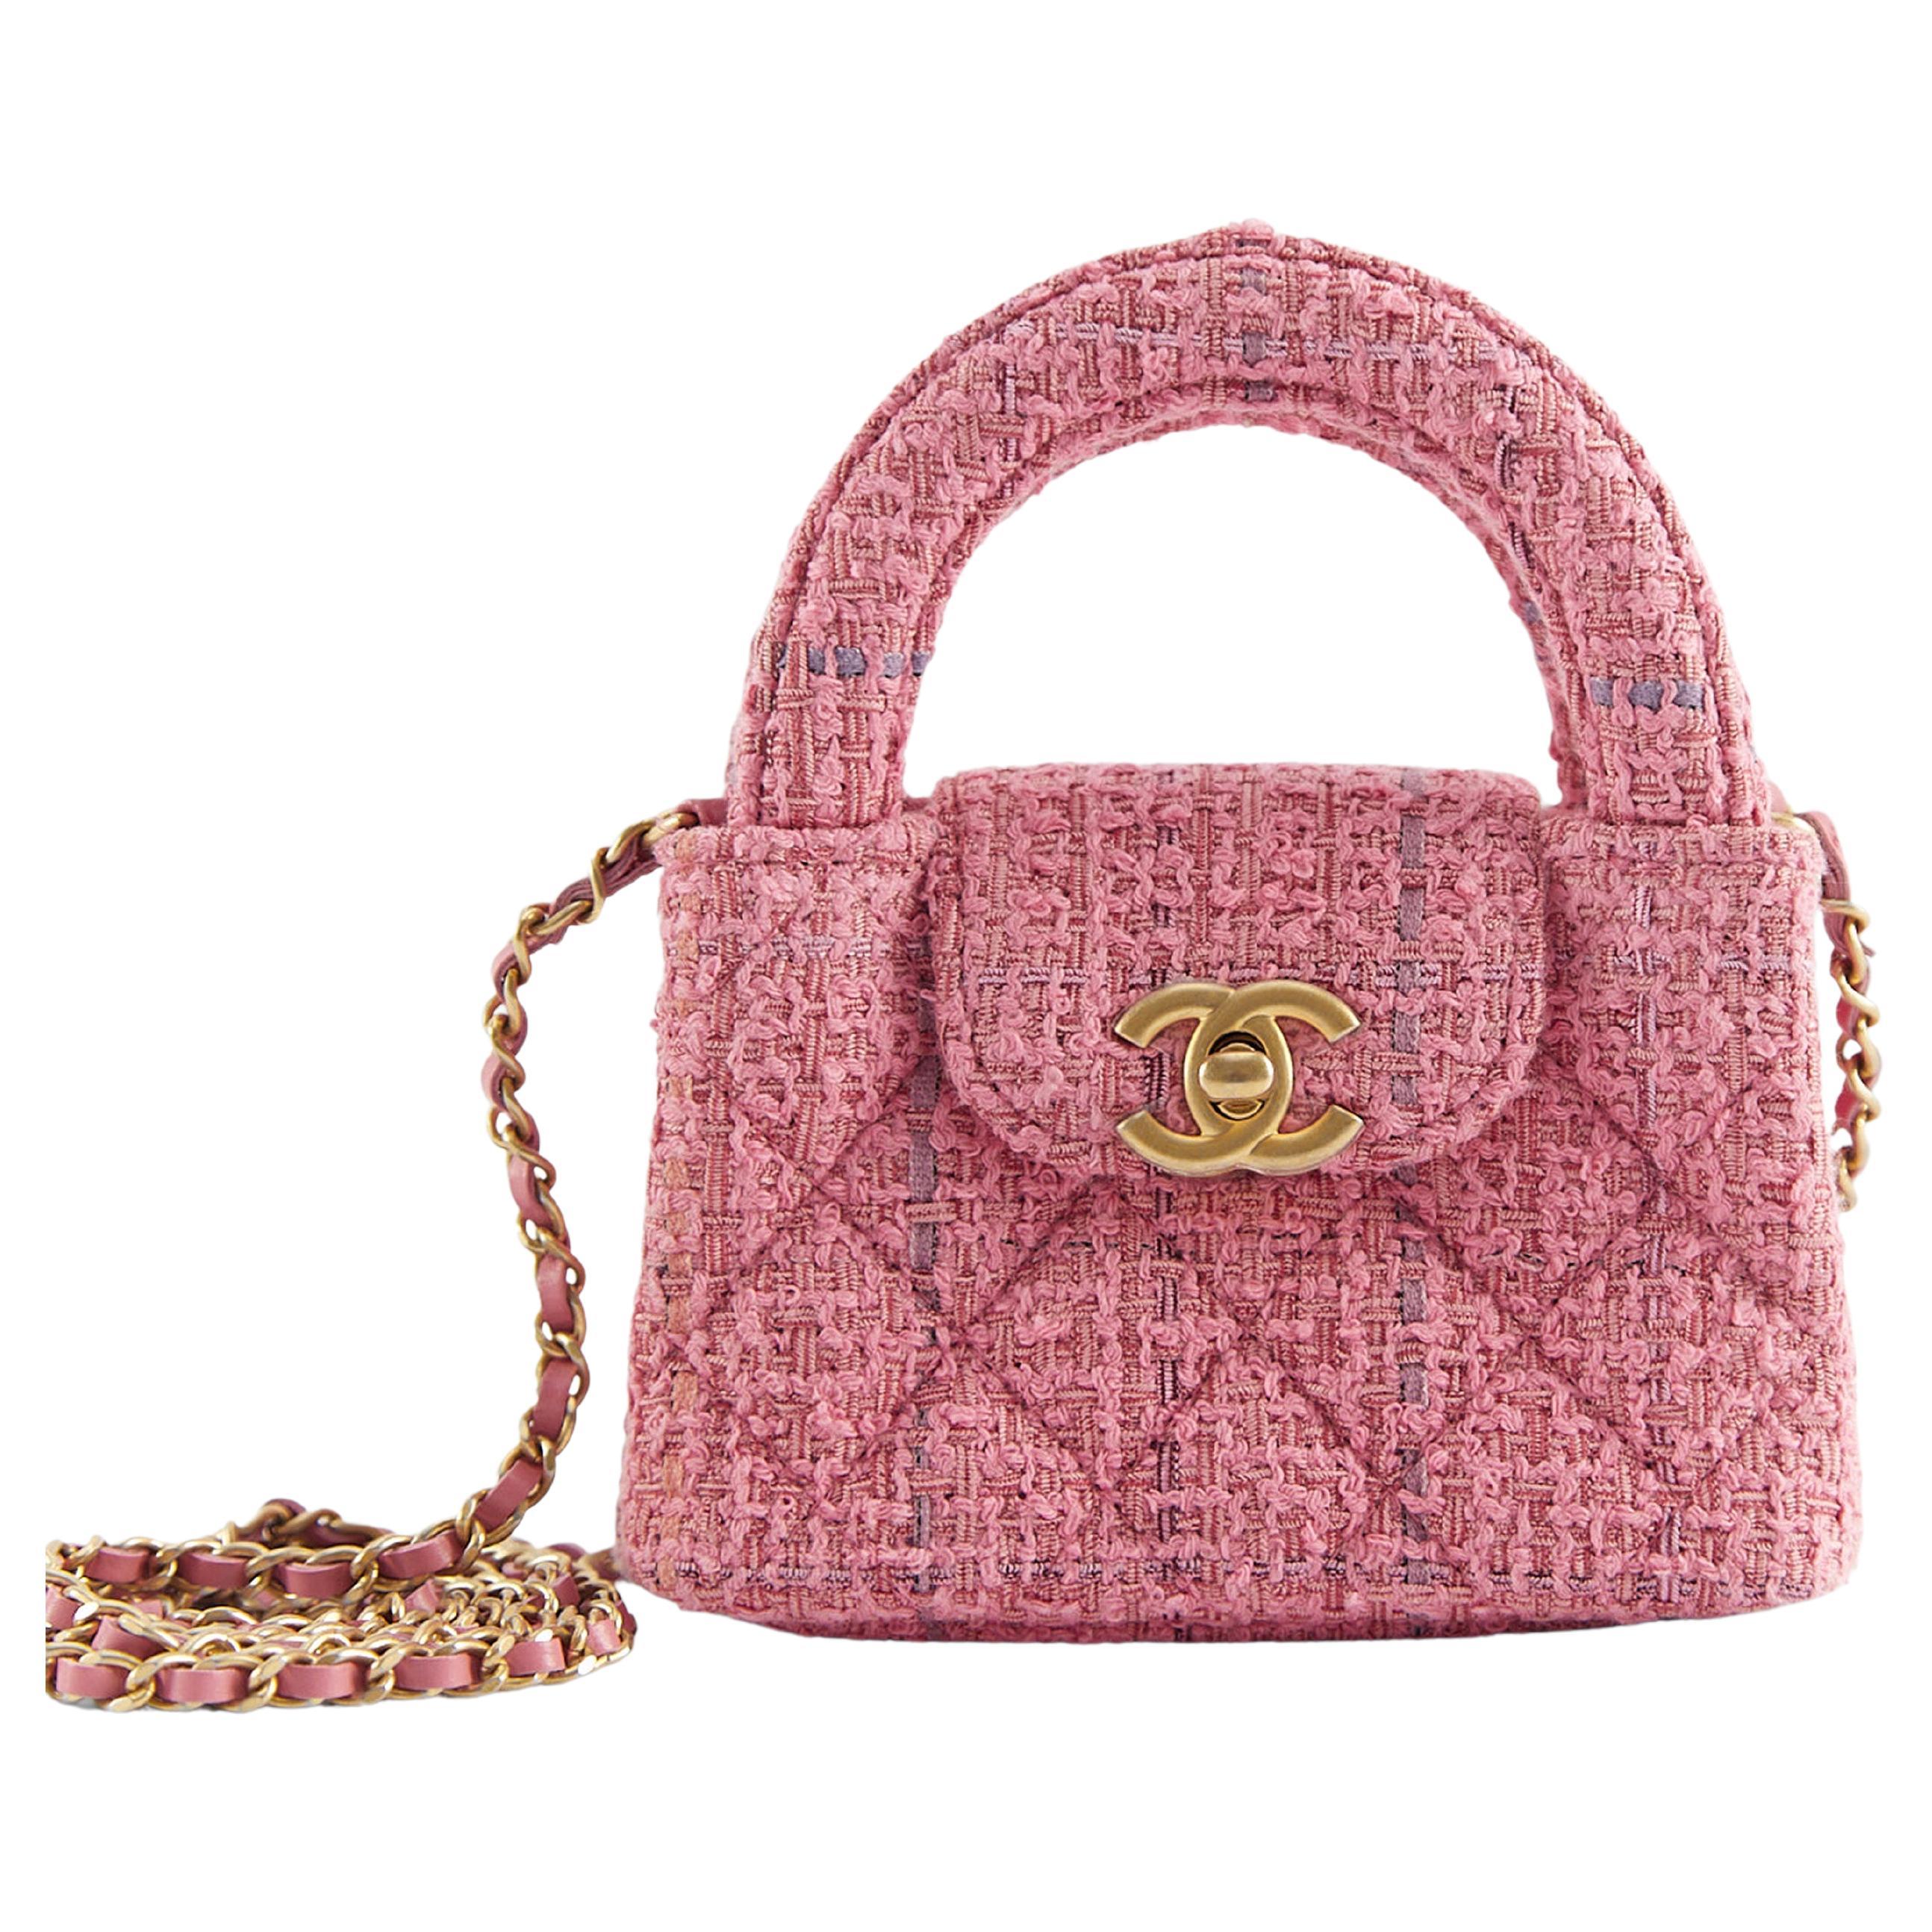 CHANEL NANO "KELLY" BAG PINK Tweed with Gold-Tone Hardware For Sale